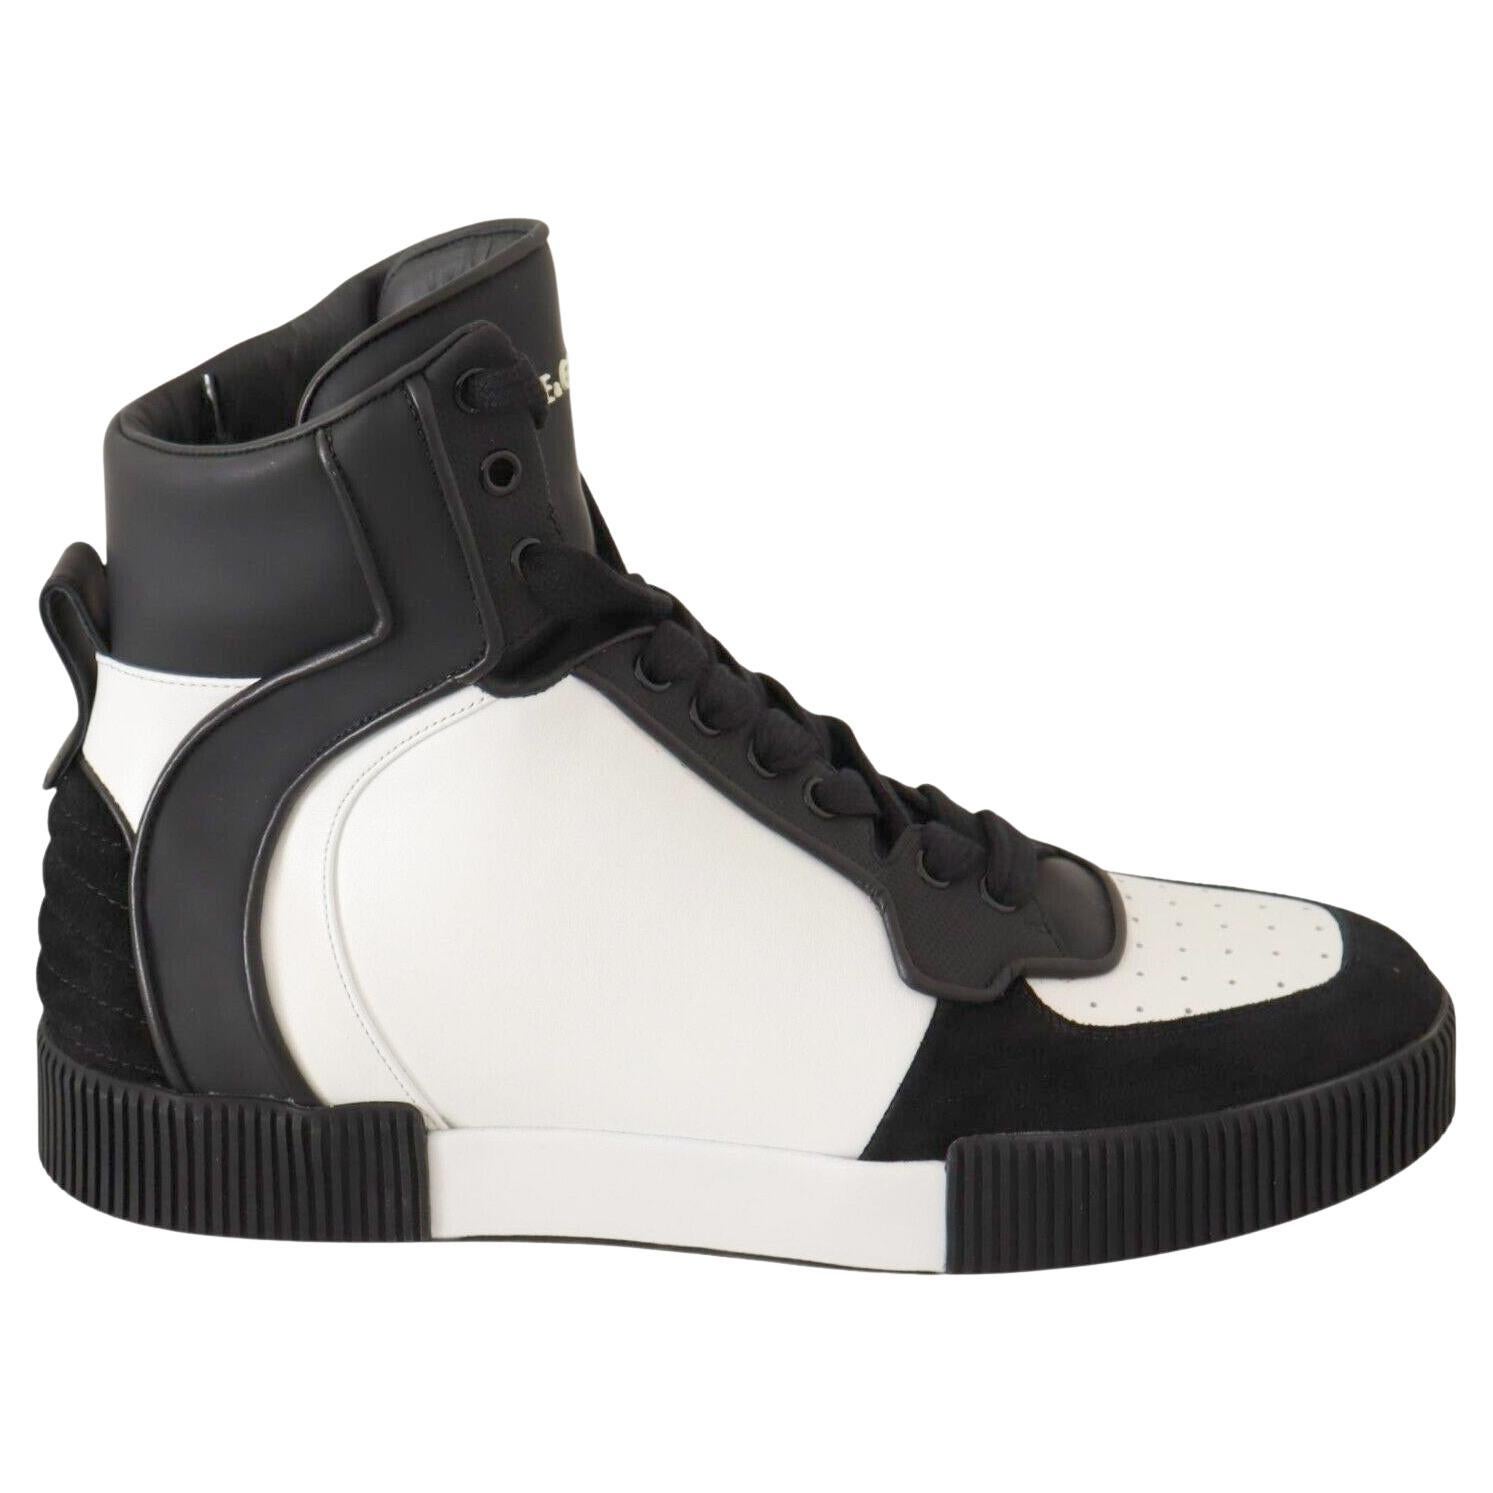 Dolce & Gabbana Black White Leather High Top Sneakers Trainers Shoes DG Miami